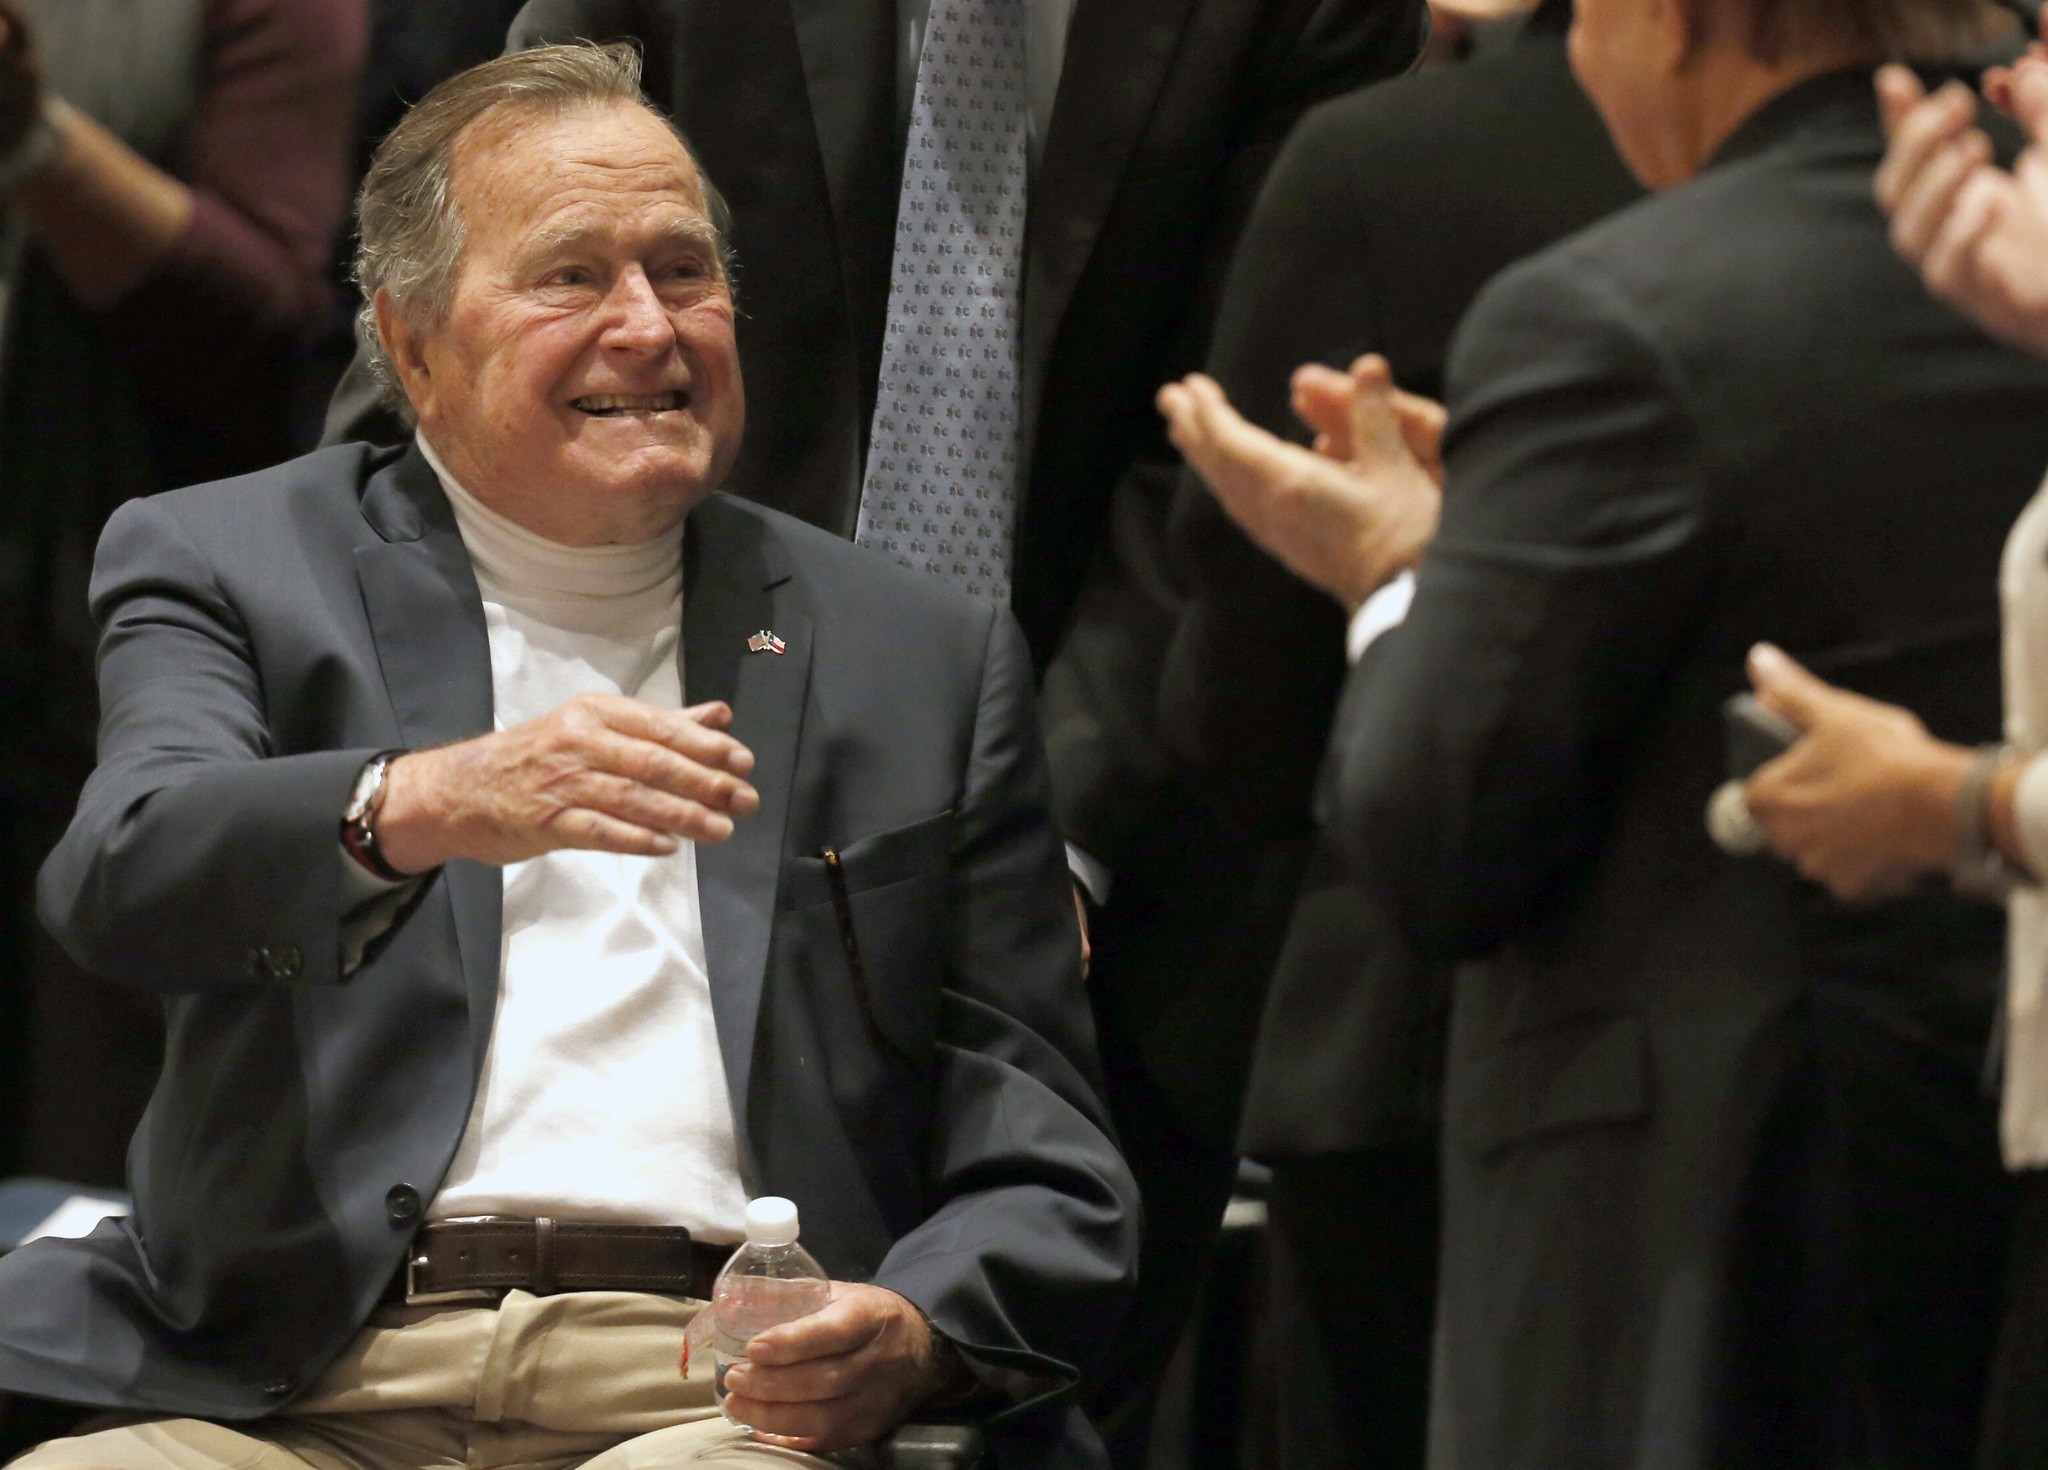 Former President George H.W. Bush acknowledges the crowd at his presidential library before his son former President George W. Bush discusses his new book. (AP Photo)